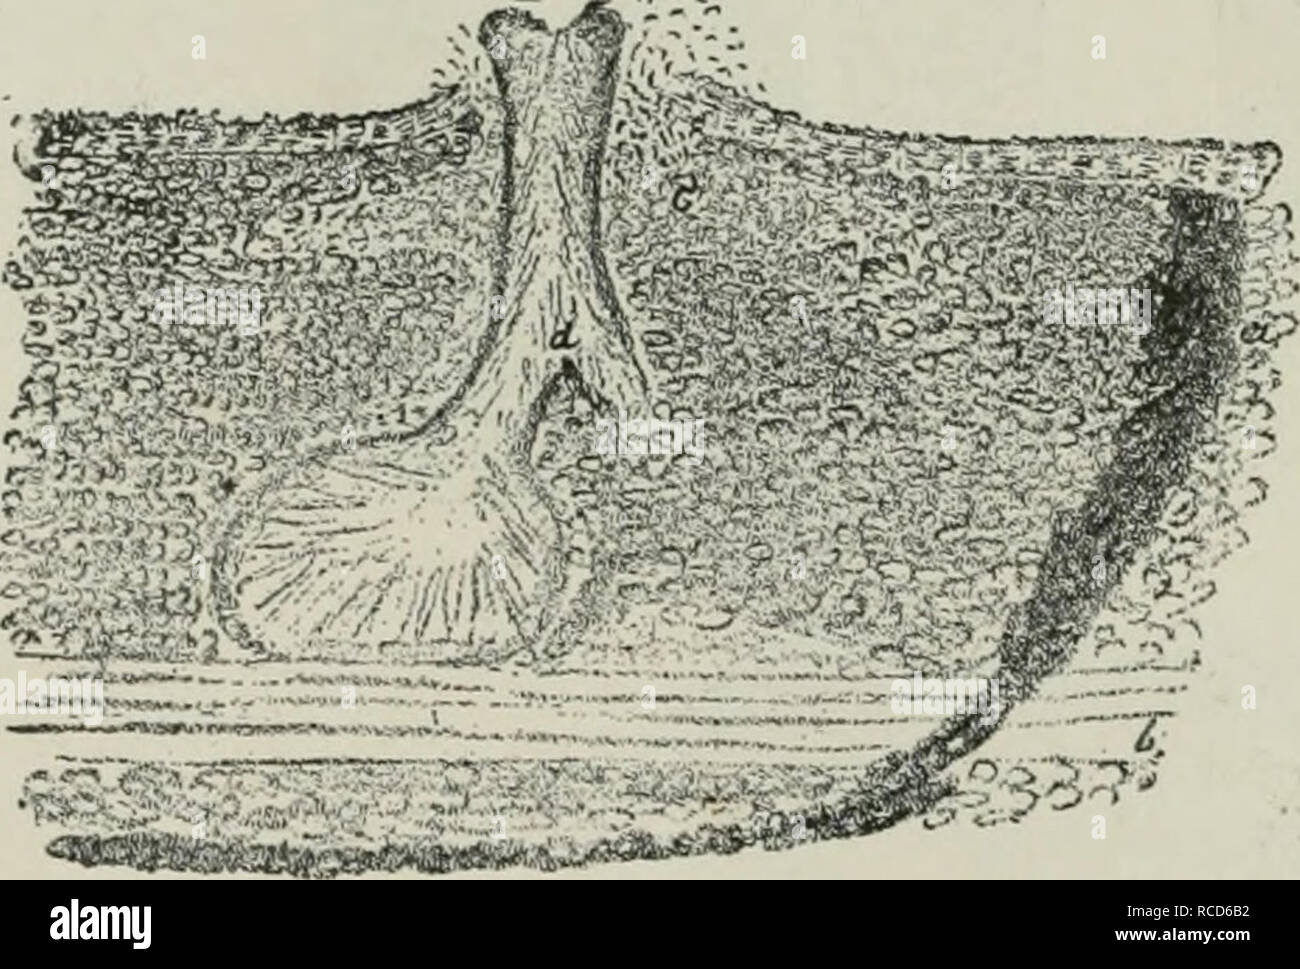 . Diseases of plants induced by cryptogamic parasites; introduction to the study of pathogenic Fungi, slime-Fungi, bacteria, &amp; Algae. Plant diseases; Parasitic plants; Fungi. Fig. 111.—Acilaospora ialeola. Portion of cortex with embedded stromata. «, Corky layer; h, after removal of corky layer; c, section of stroma. ( x f.) (After Hartig.). ff;tst)5-*«*»*»« (k.-'''-^* Fio. 112.—Section of stroma of ^e'?nos7?om. a, Boundary of stroma formed of dark brown fungu.s-mycelium; h, sclerenchyma-strand of the cortex ; c, conidial cushion ; rf, union of necks of two perithecia. (After Hartig.). Ple Stock Photo